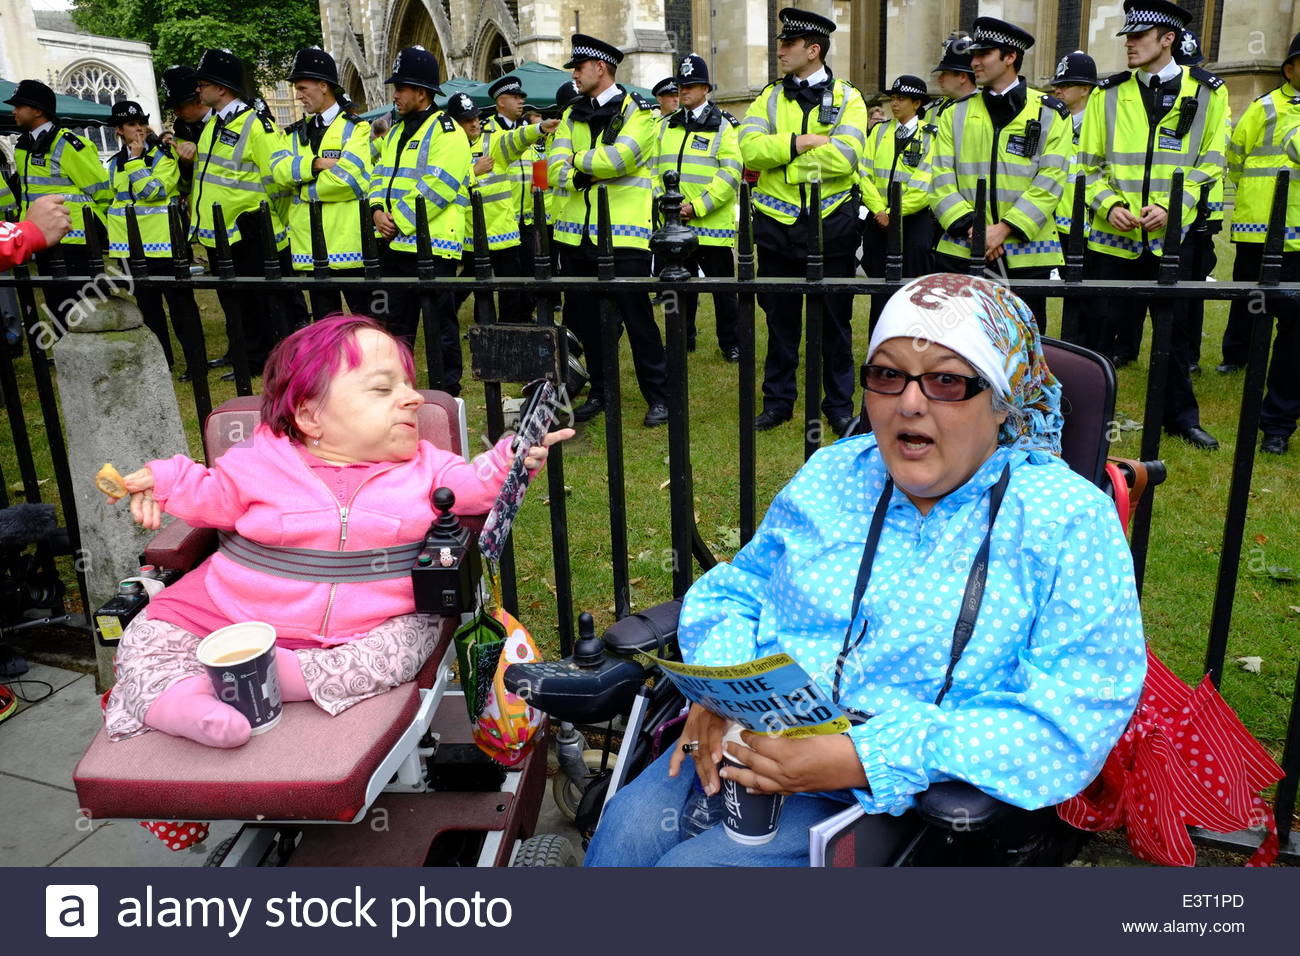 Disabled People Against Cuts Occupation of Westminster Abbey grounds as part of the Save The Independent Living Fund campaign. ILF was scrapped by the Tory regime in England but saved by the Scottish Government in Scotland under devolved powers